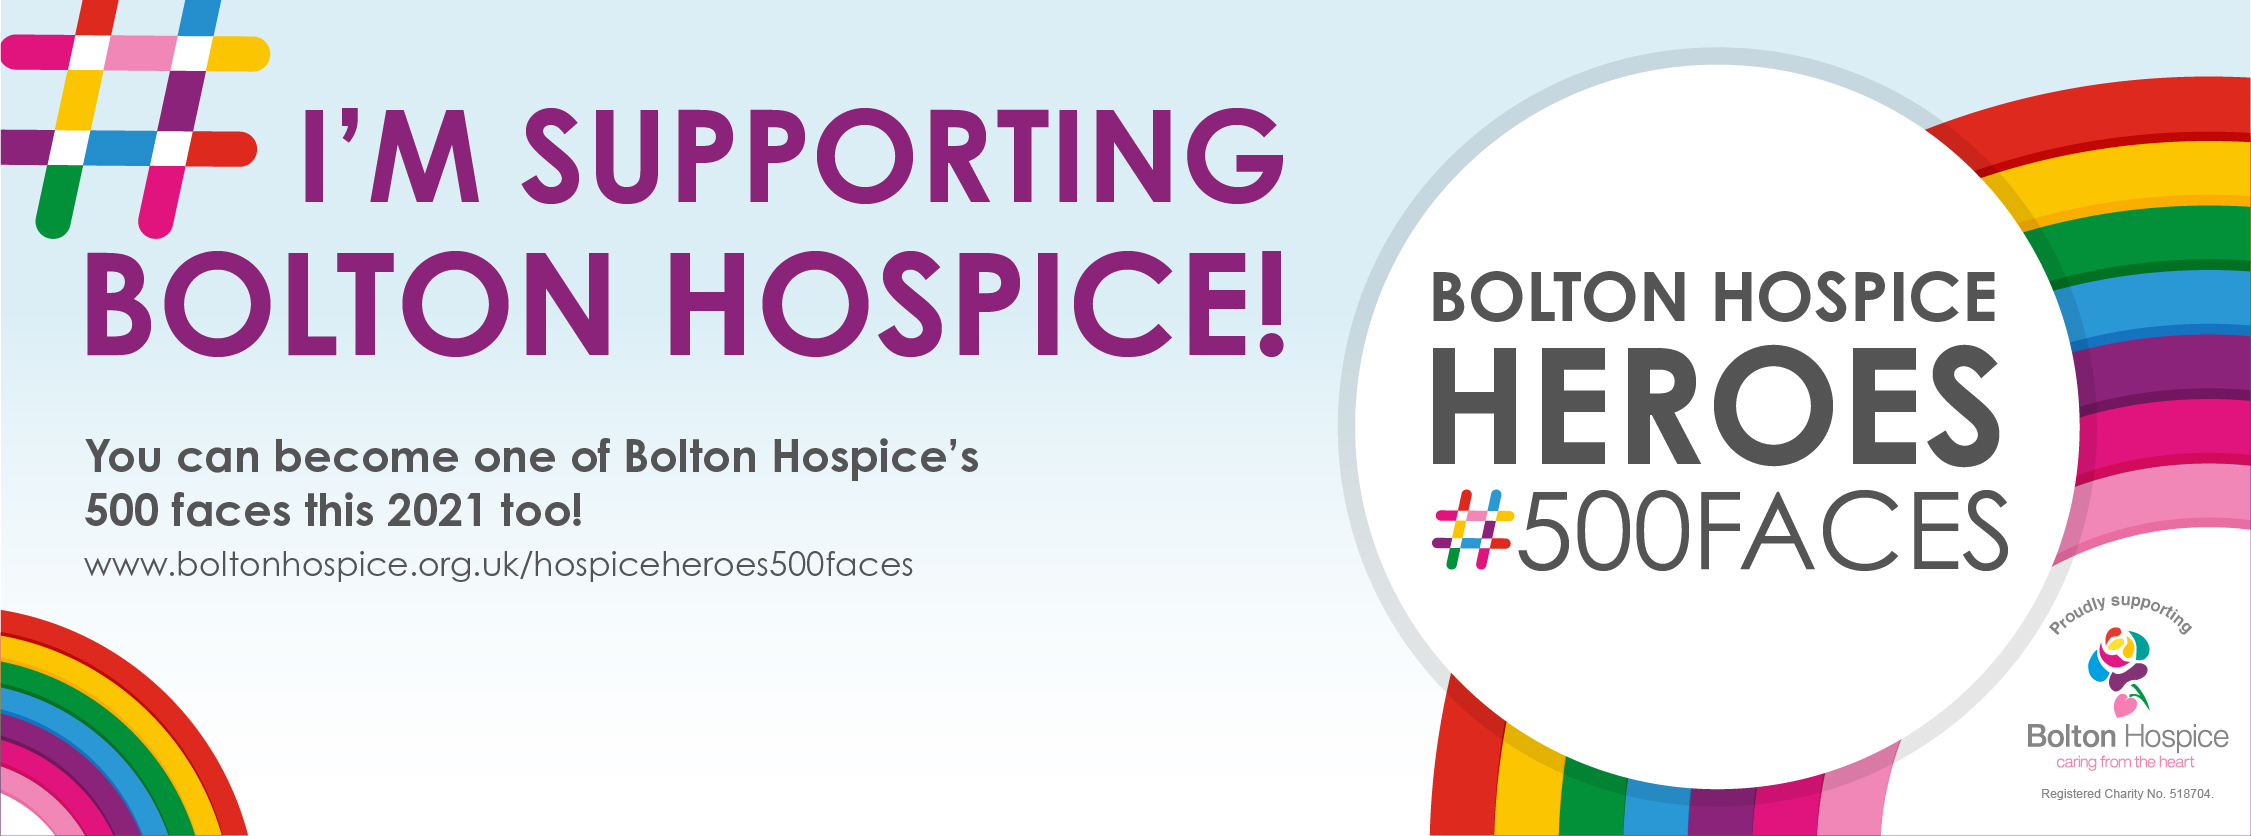 Supporter - Bolton Hospice Heroes facebook cover